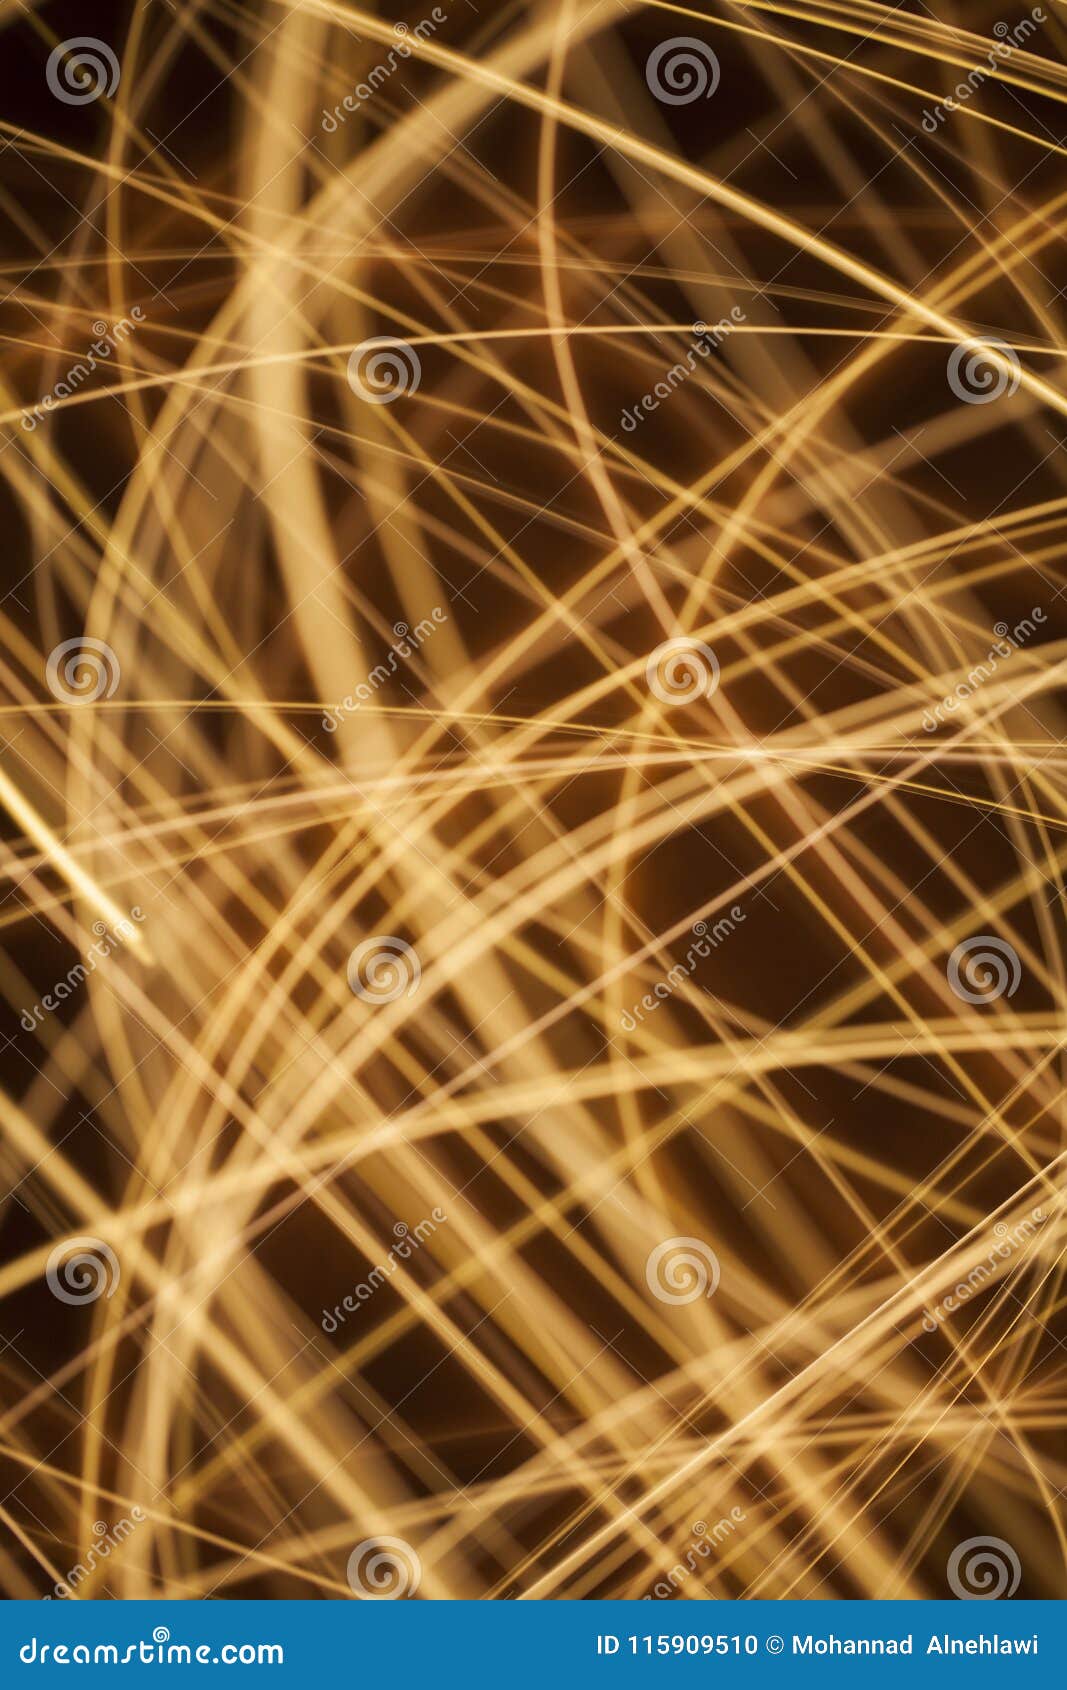 Swirl Sparkling Glowing Lines Background Stock Photo - Image of colored ...